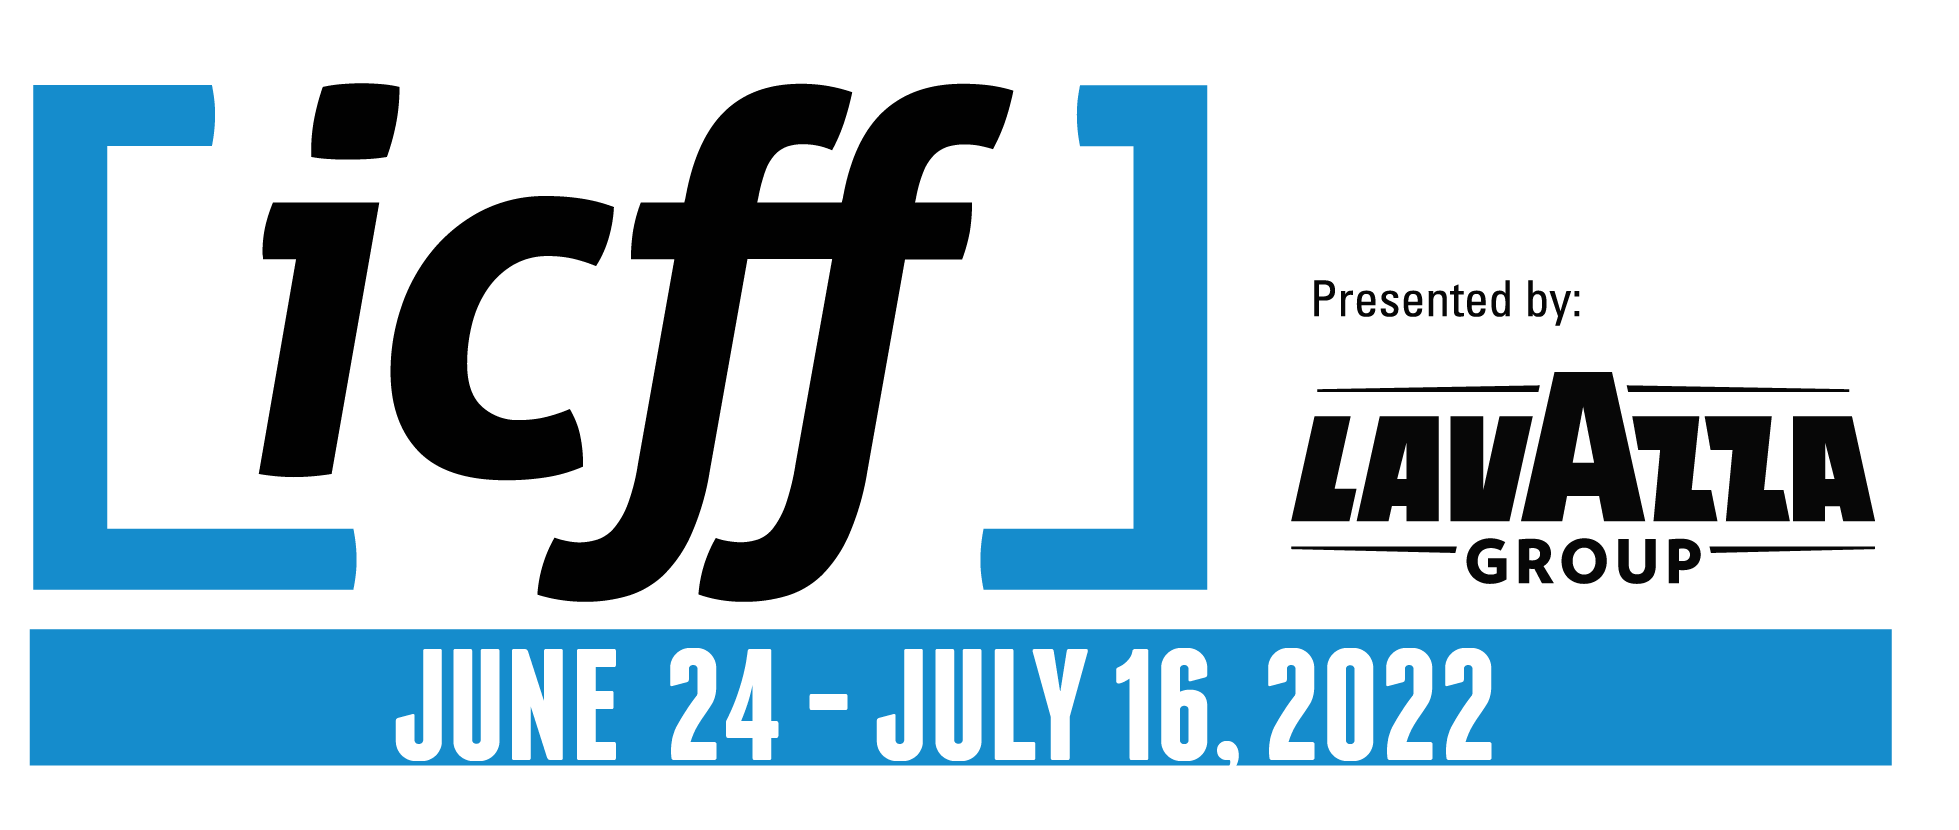 ICFF 2022 logo with dates-01